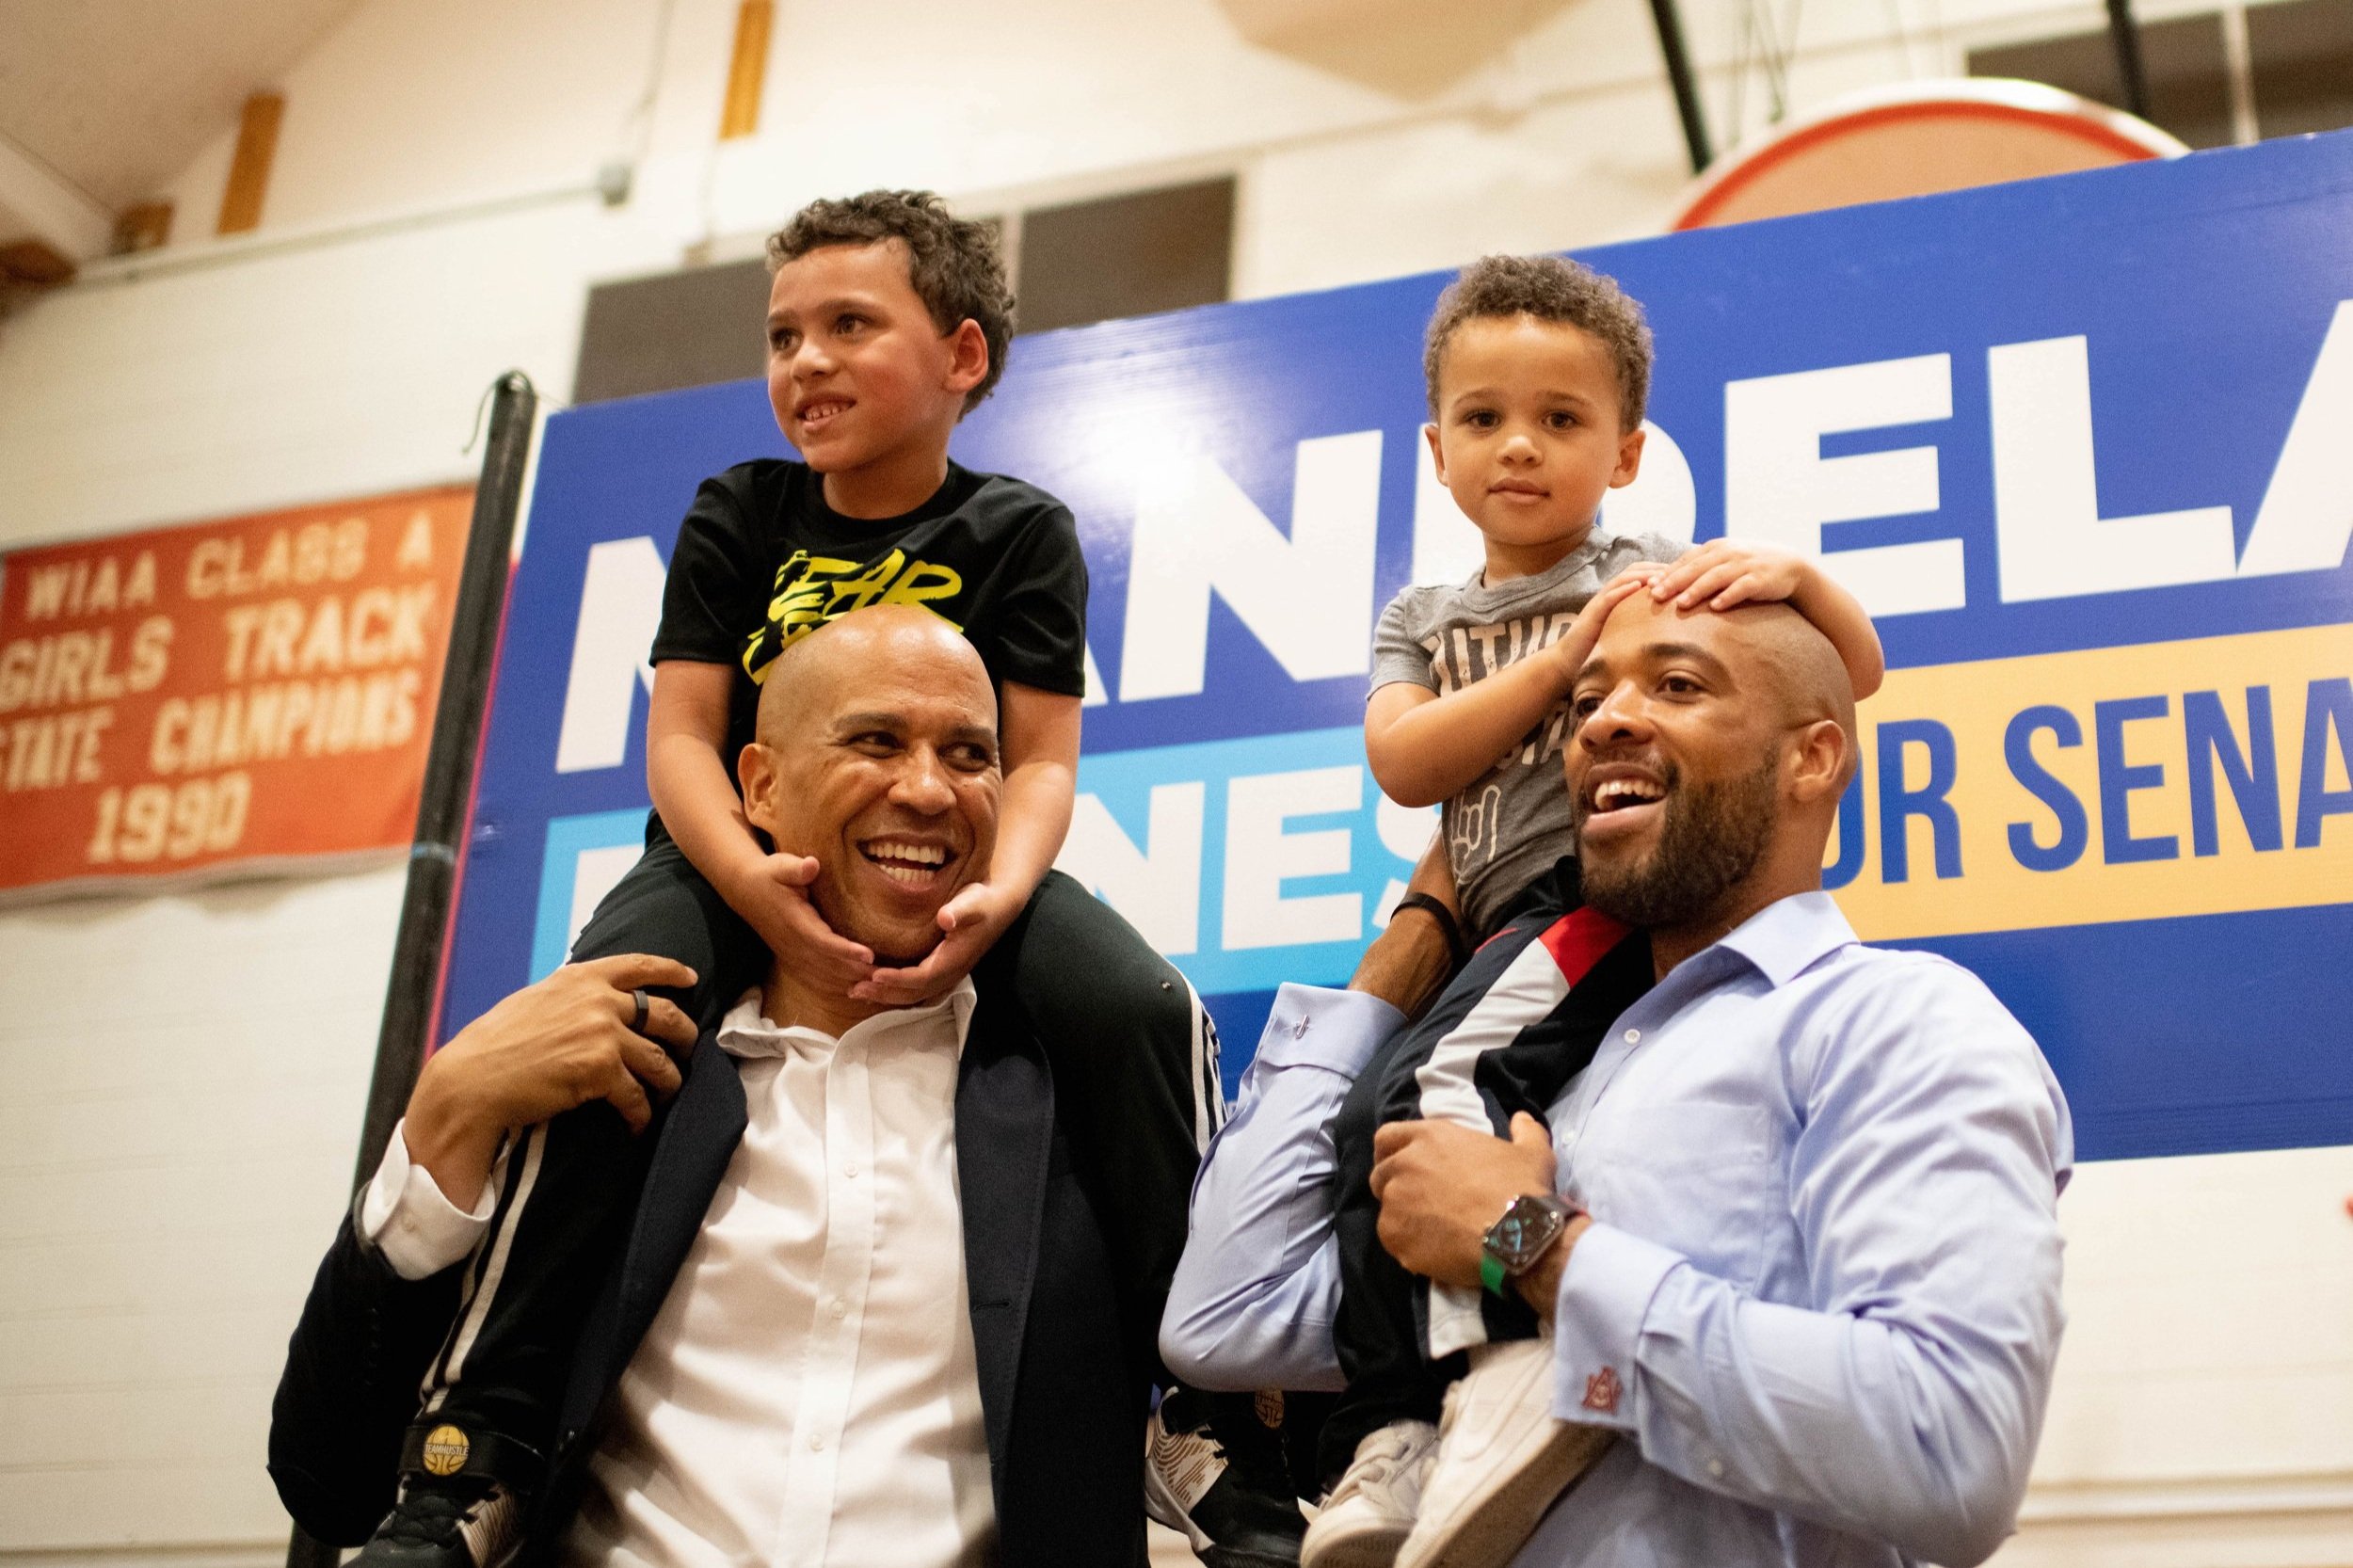 U.S. Senator Cory Booker and Lt. Governor Mandela Barnes at a campaign rally in Milwaukee Wisconsin, 2022